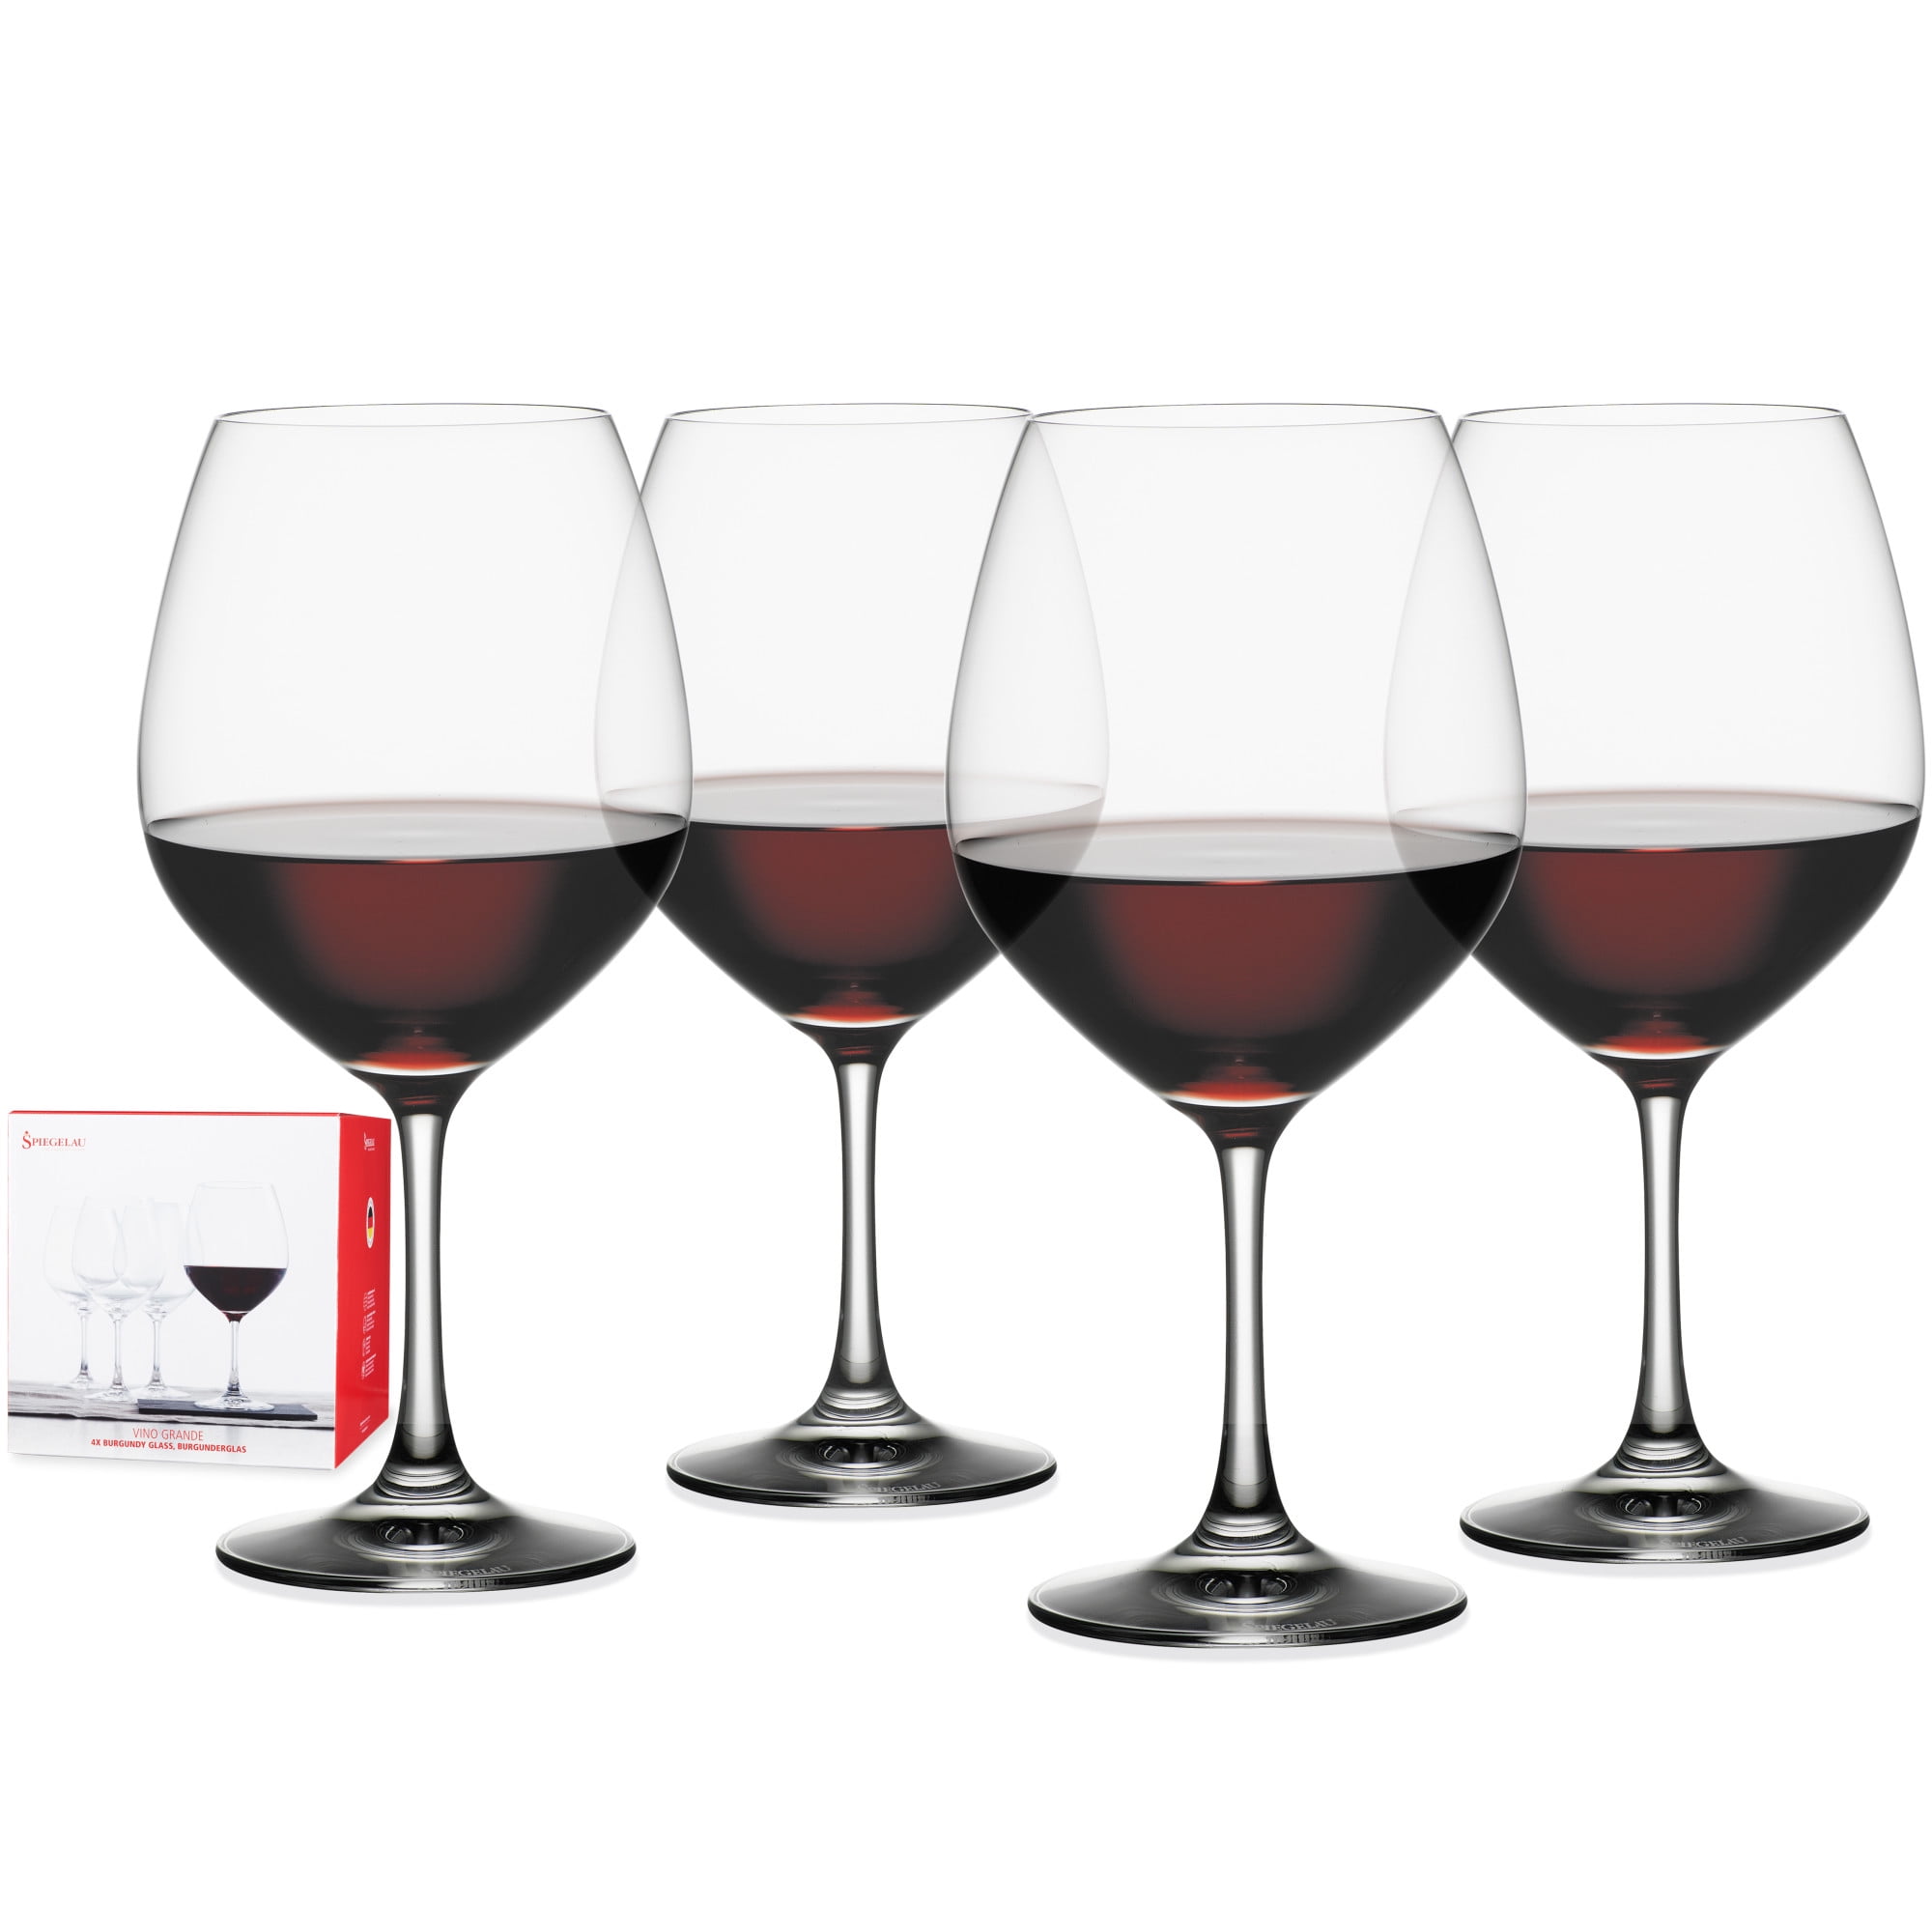 Grand Pinot Wine Glass with Lid Shimmer Orange